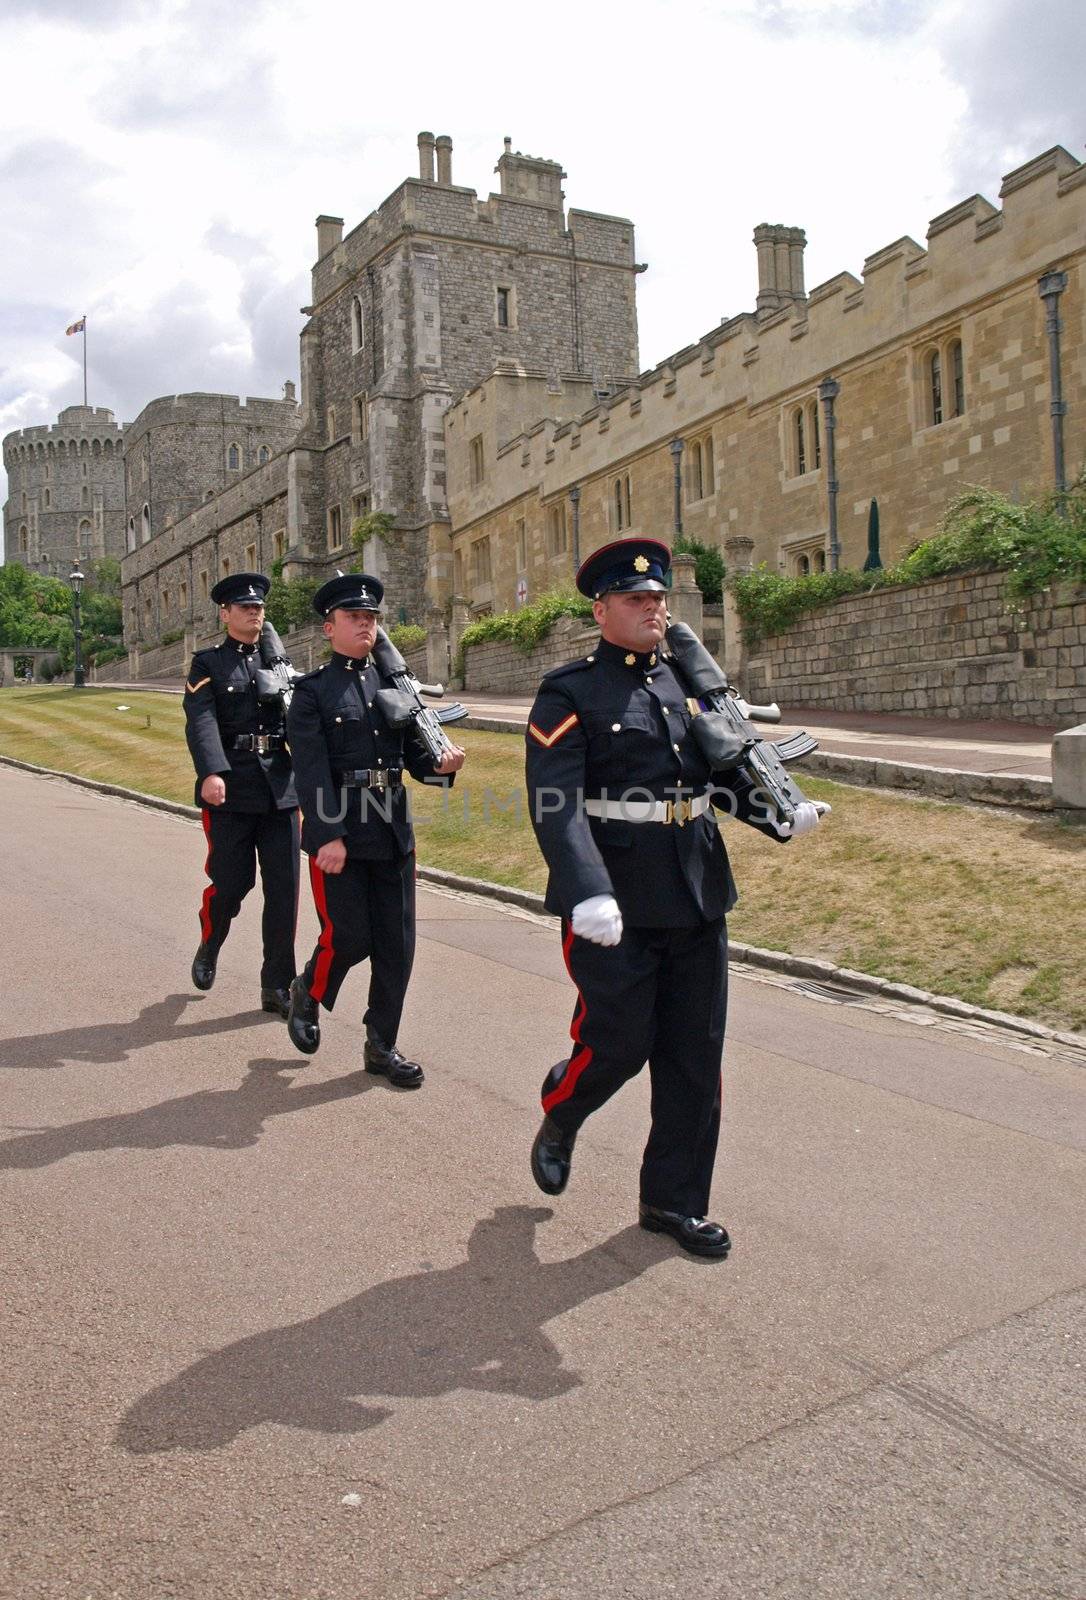 royal guards at Windsor Castle by Ric510